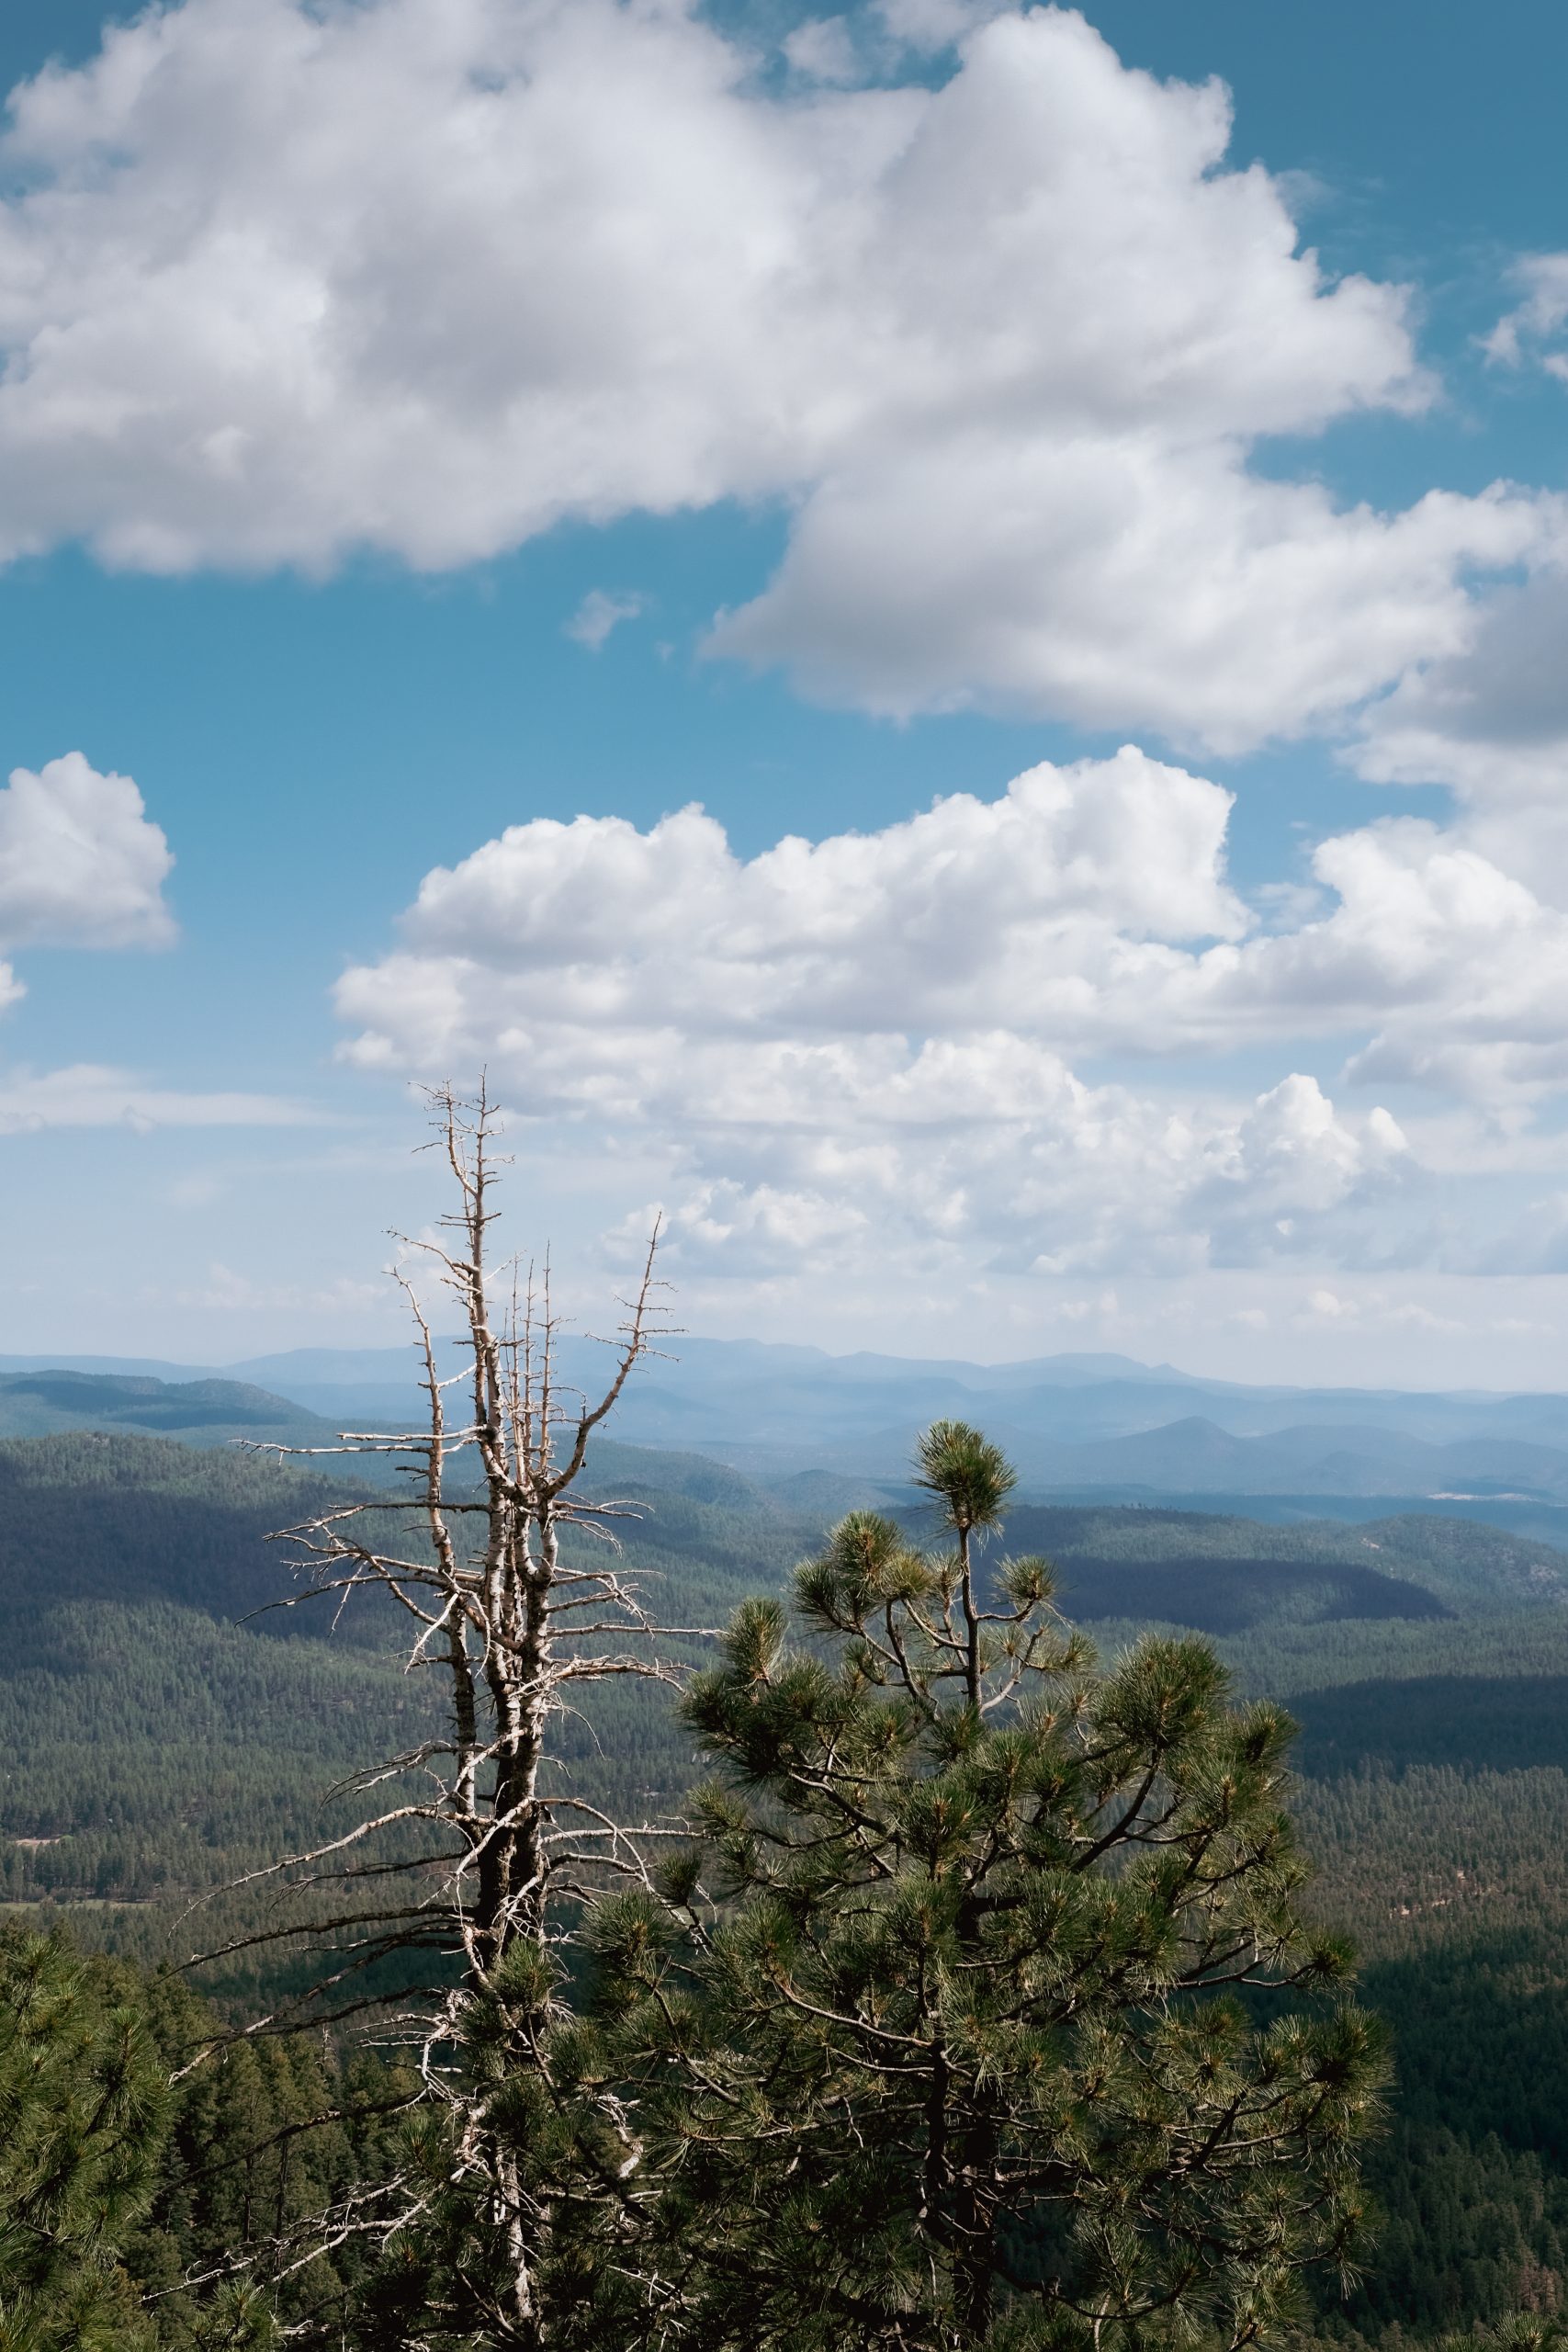 Photograph of the tops of green mountains and hills with a dead tree in the foreground.